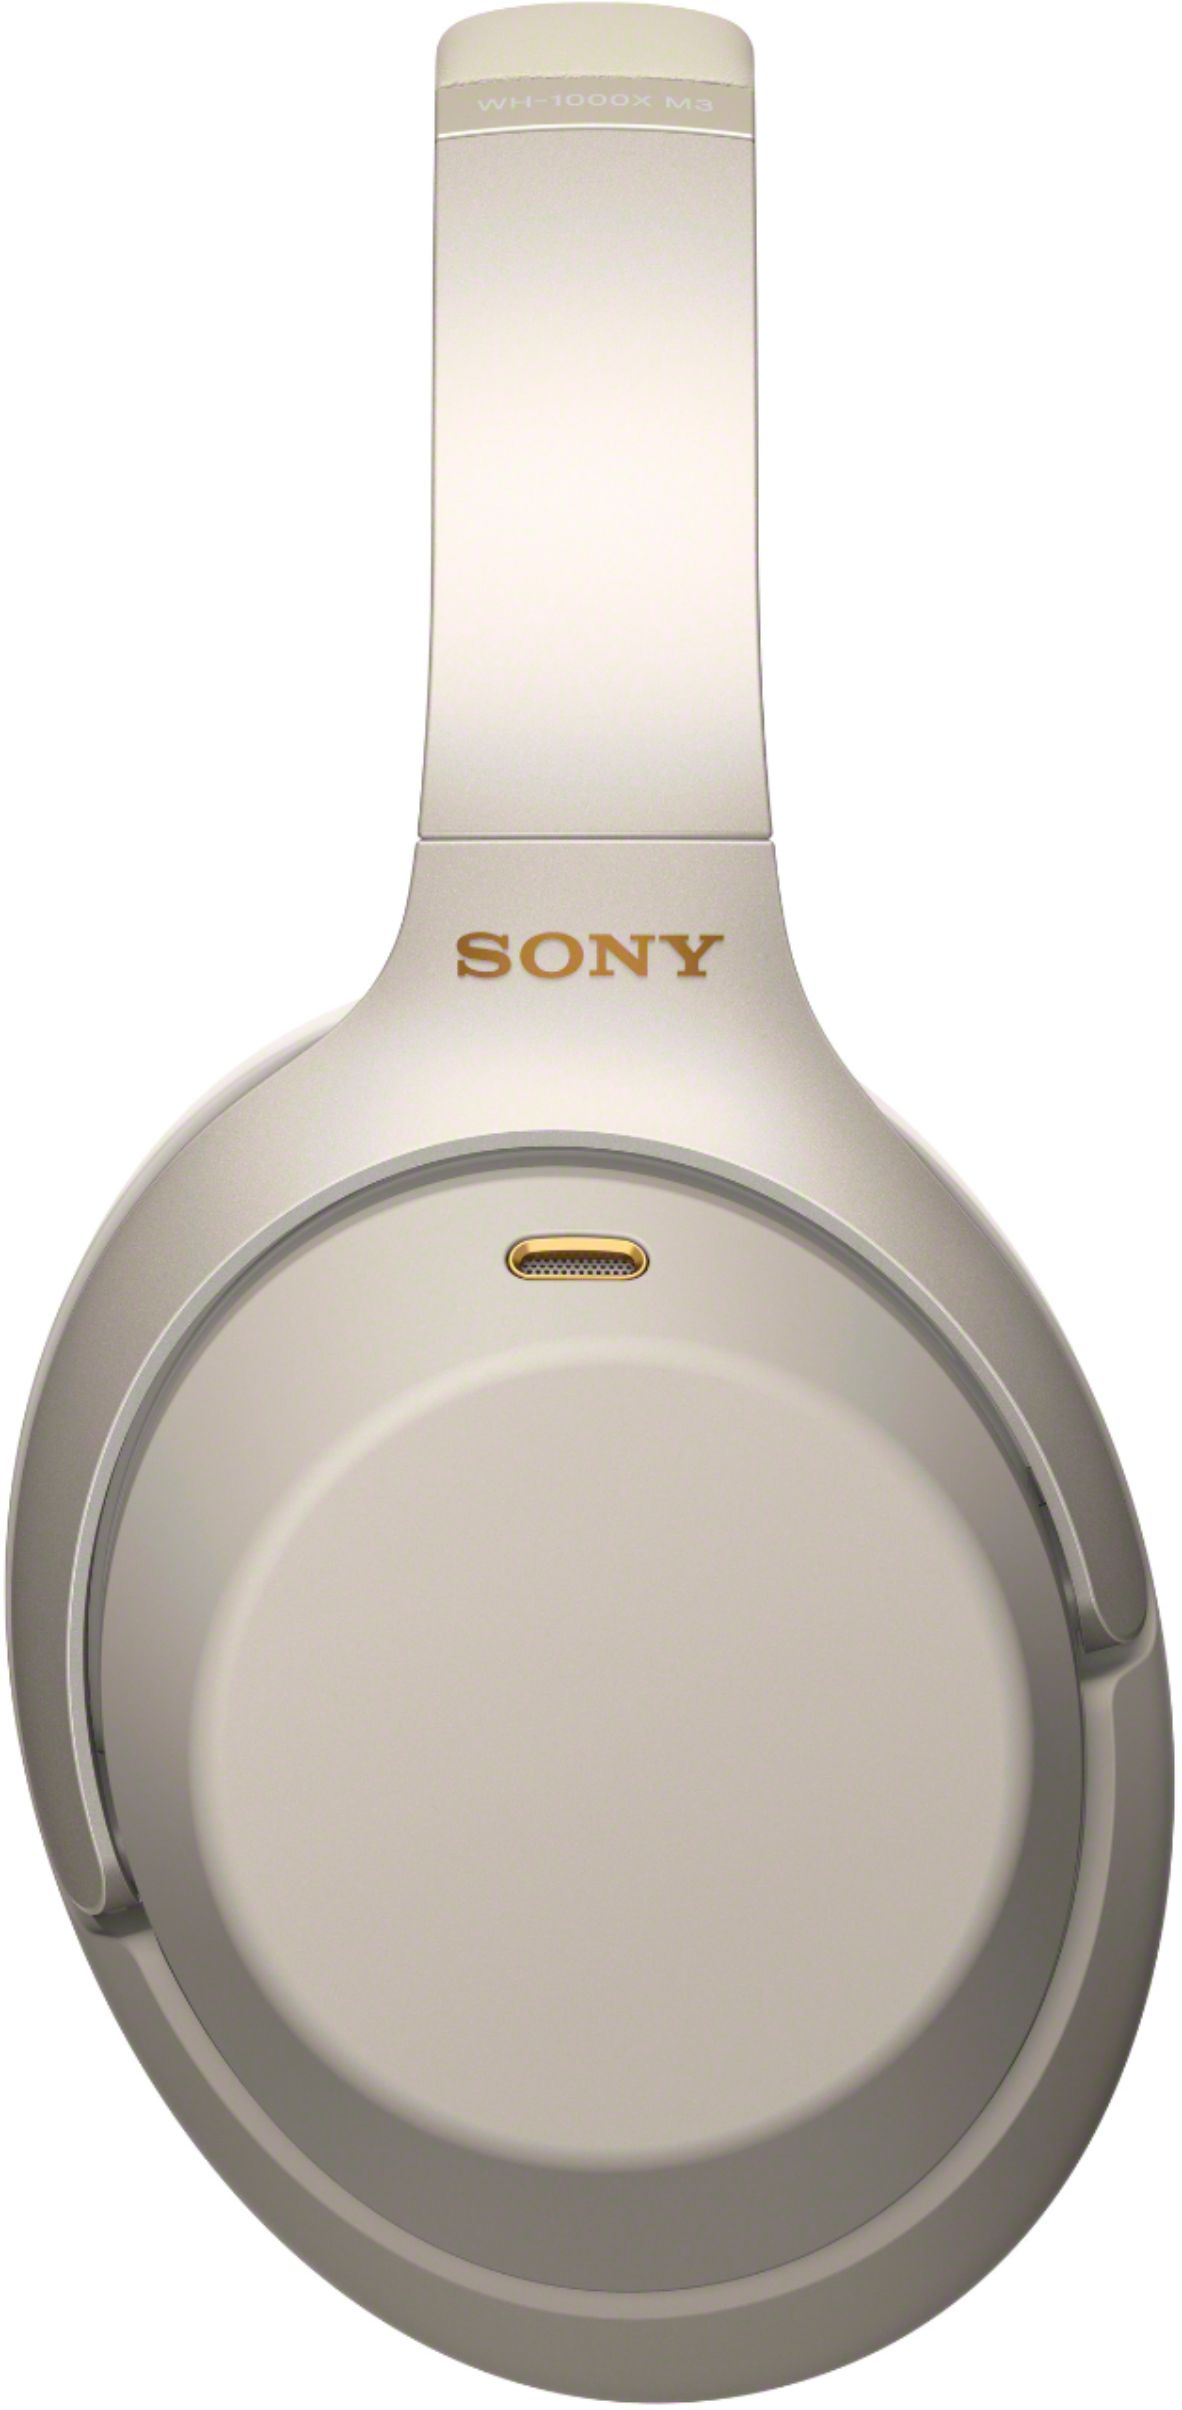 Best Buy: Sony WH-1000XM3 Wireless Noise Cancelling Over-the-Ear 